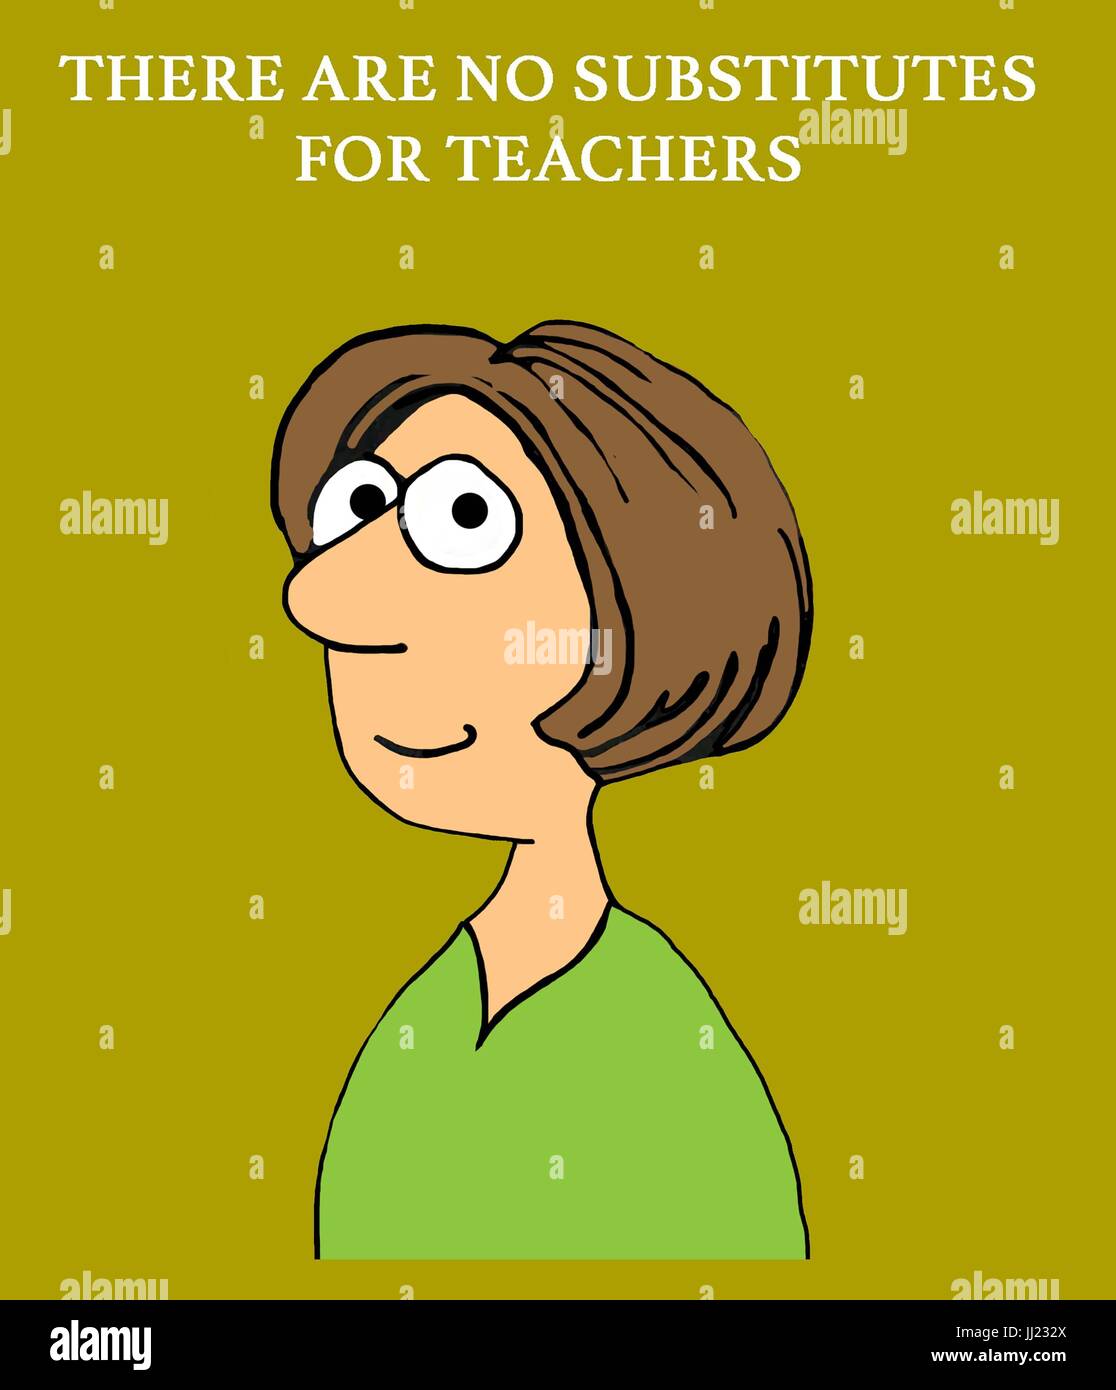 Education cartoon illustration of a woman and 'no substitute for teachers'. Stock Photo